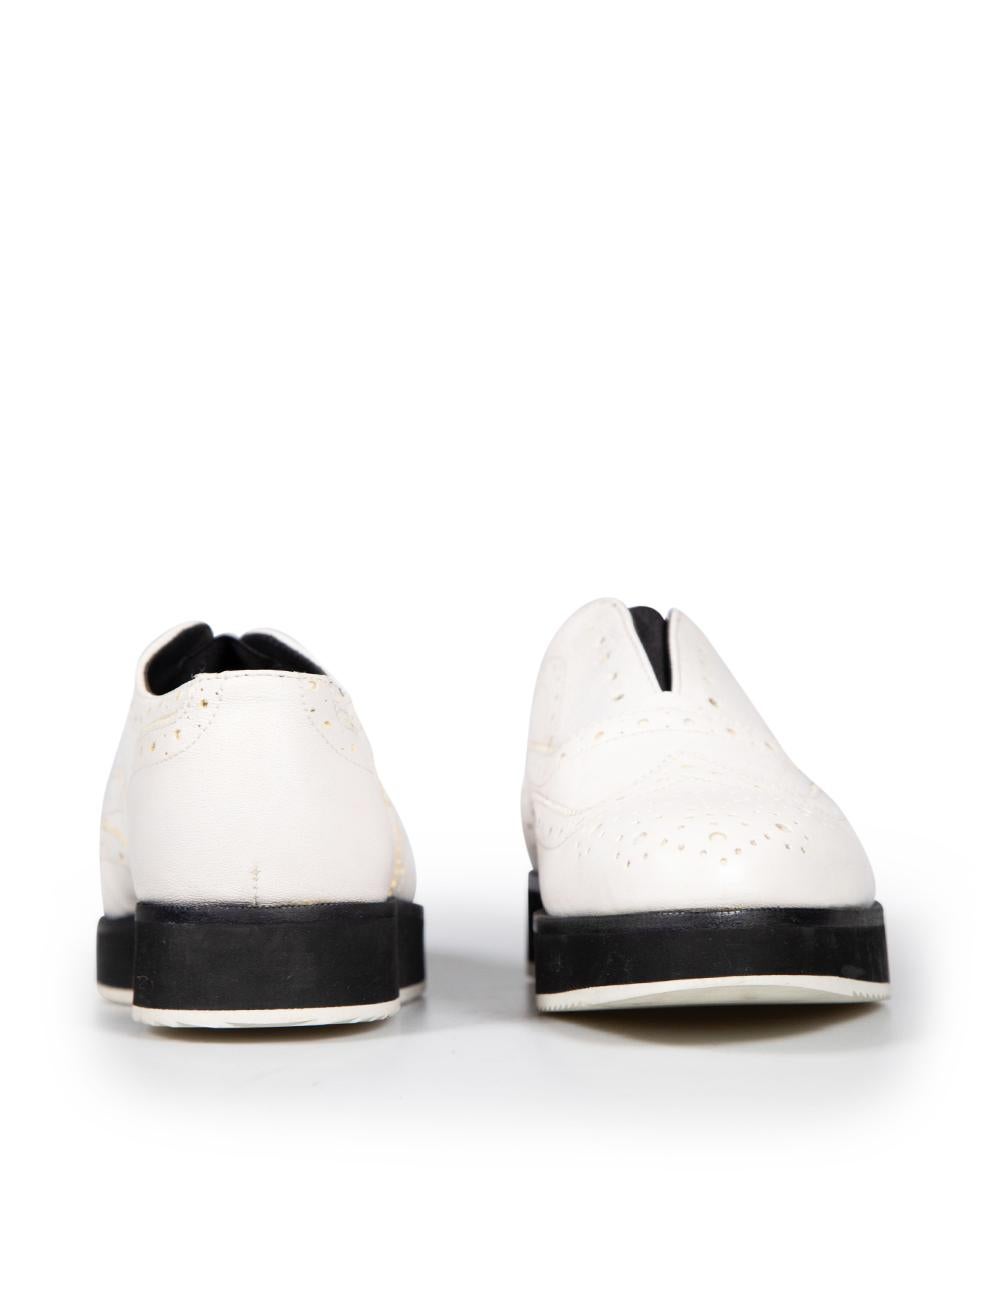 Rag & Bone White Leather Flatform Brogues Size IT 36 In Good Condition For Sale In London, GB